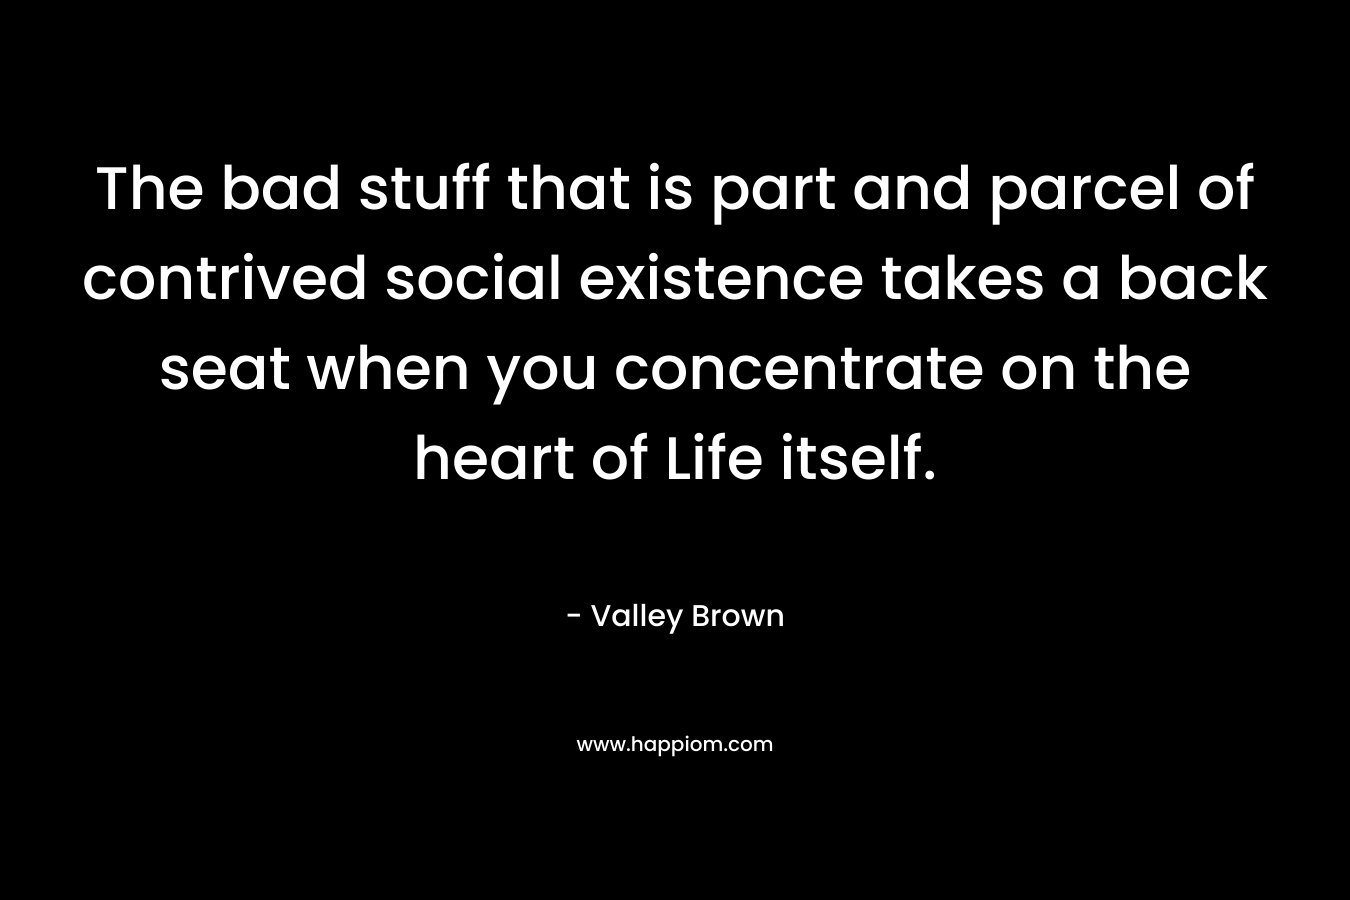 The bad stuff that is part and parcel of contrived social existence takes a back seat when you concentrate on the heart of Life itself. – Valley Brown